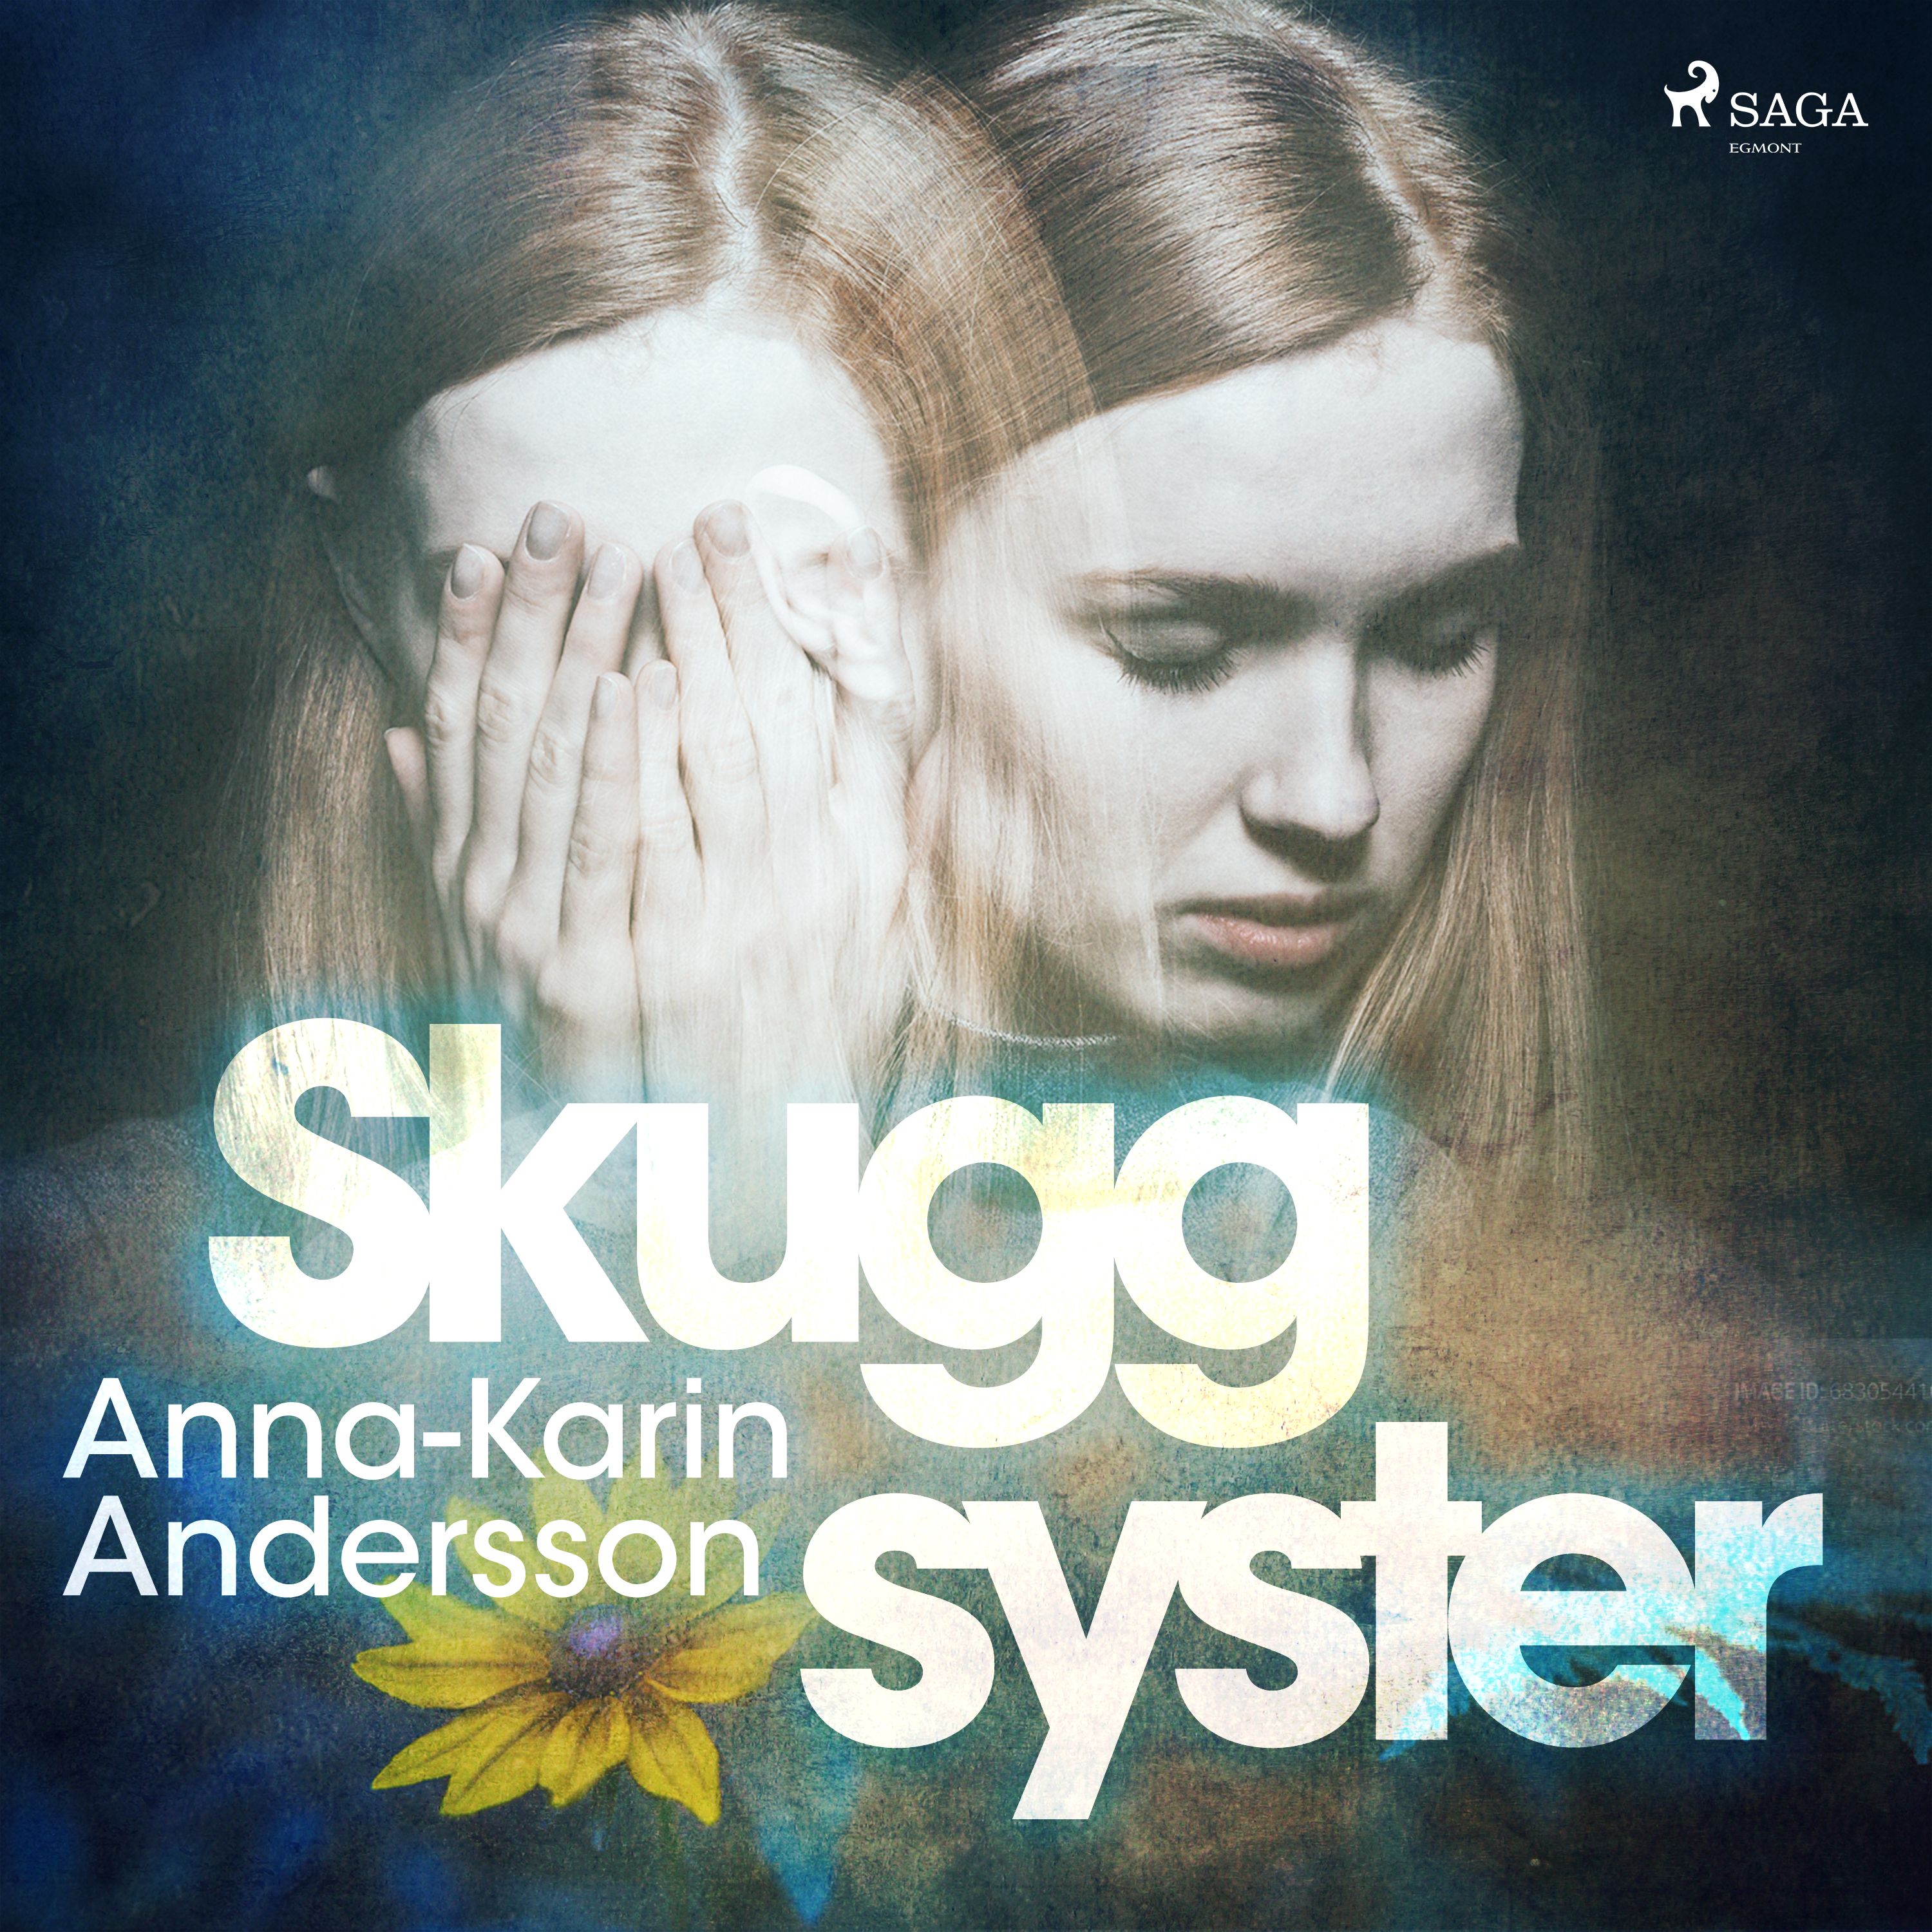 Skuggsyster, audiobook by Anna-Karin Andersson